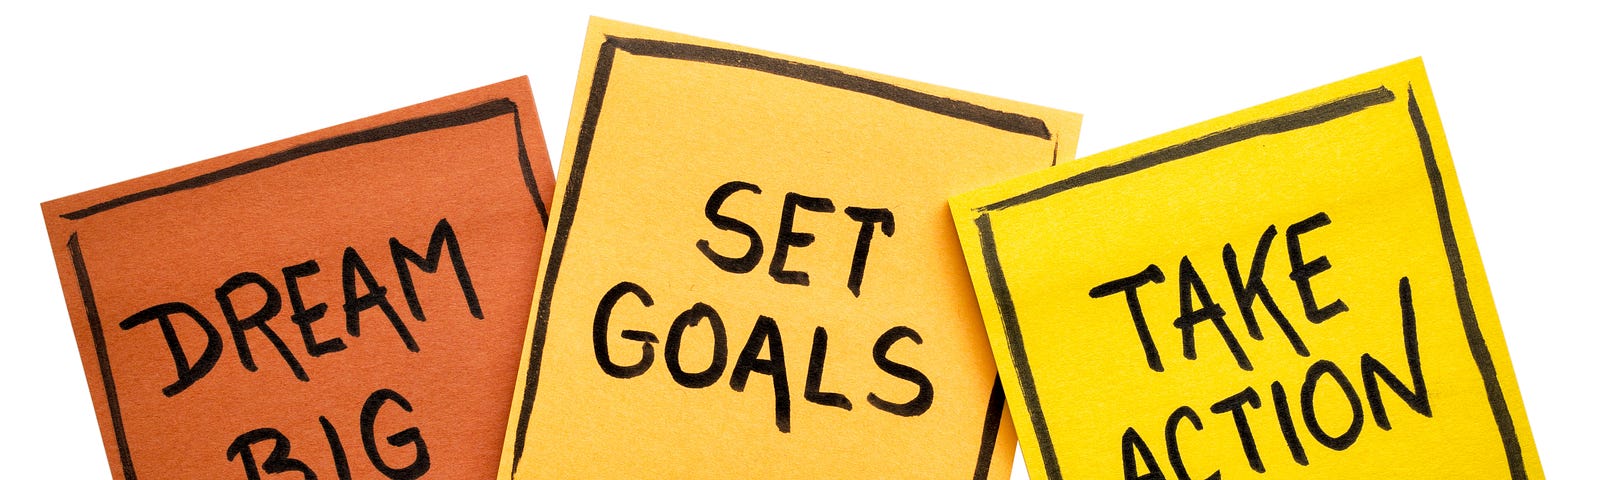 Sticky notes with inspirational quotes for an article about setting SMART goals this new year.